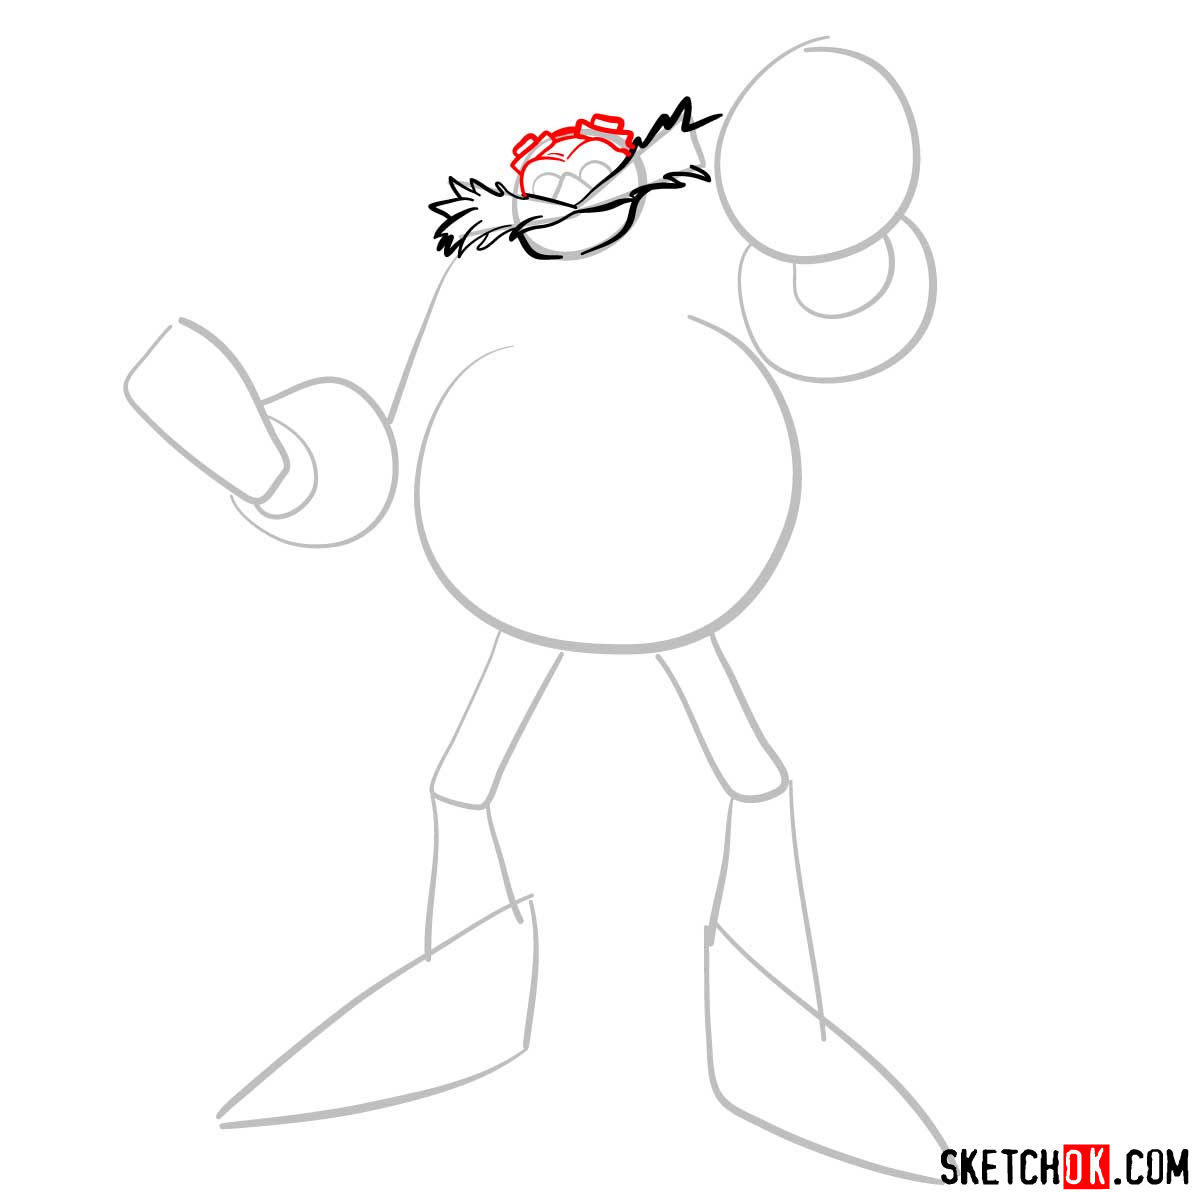 How to draw Dr. Robotnik (Eggman) from Sonic the Hedgehog - step 04